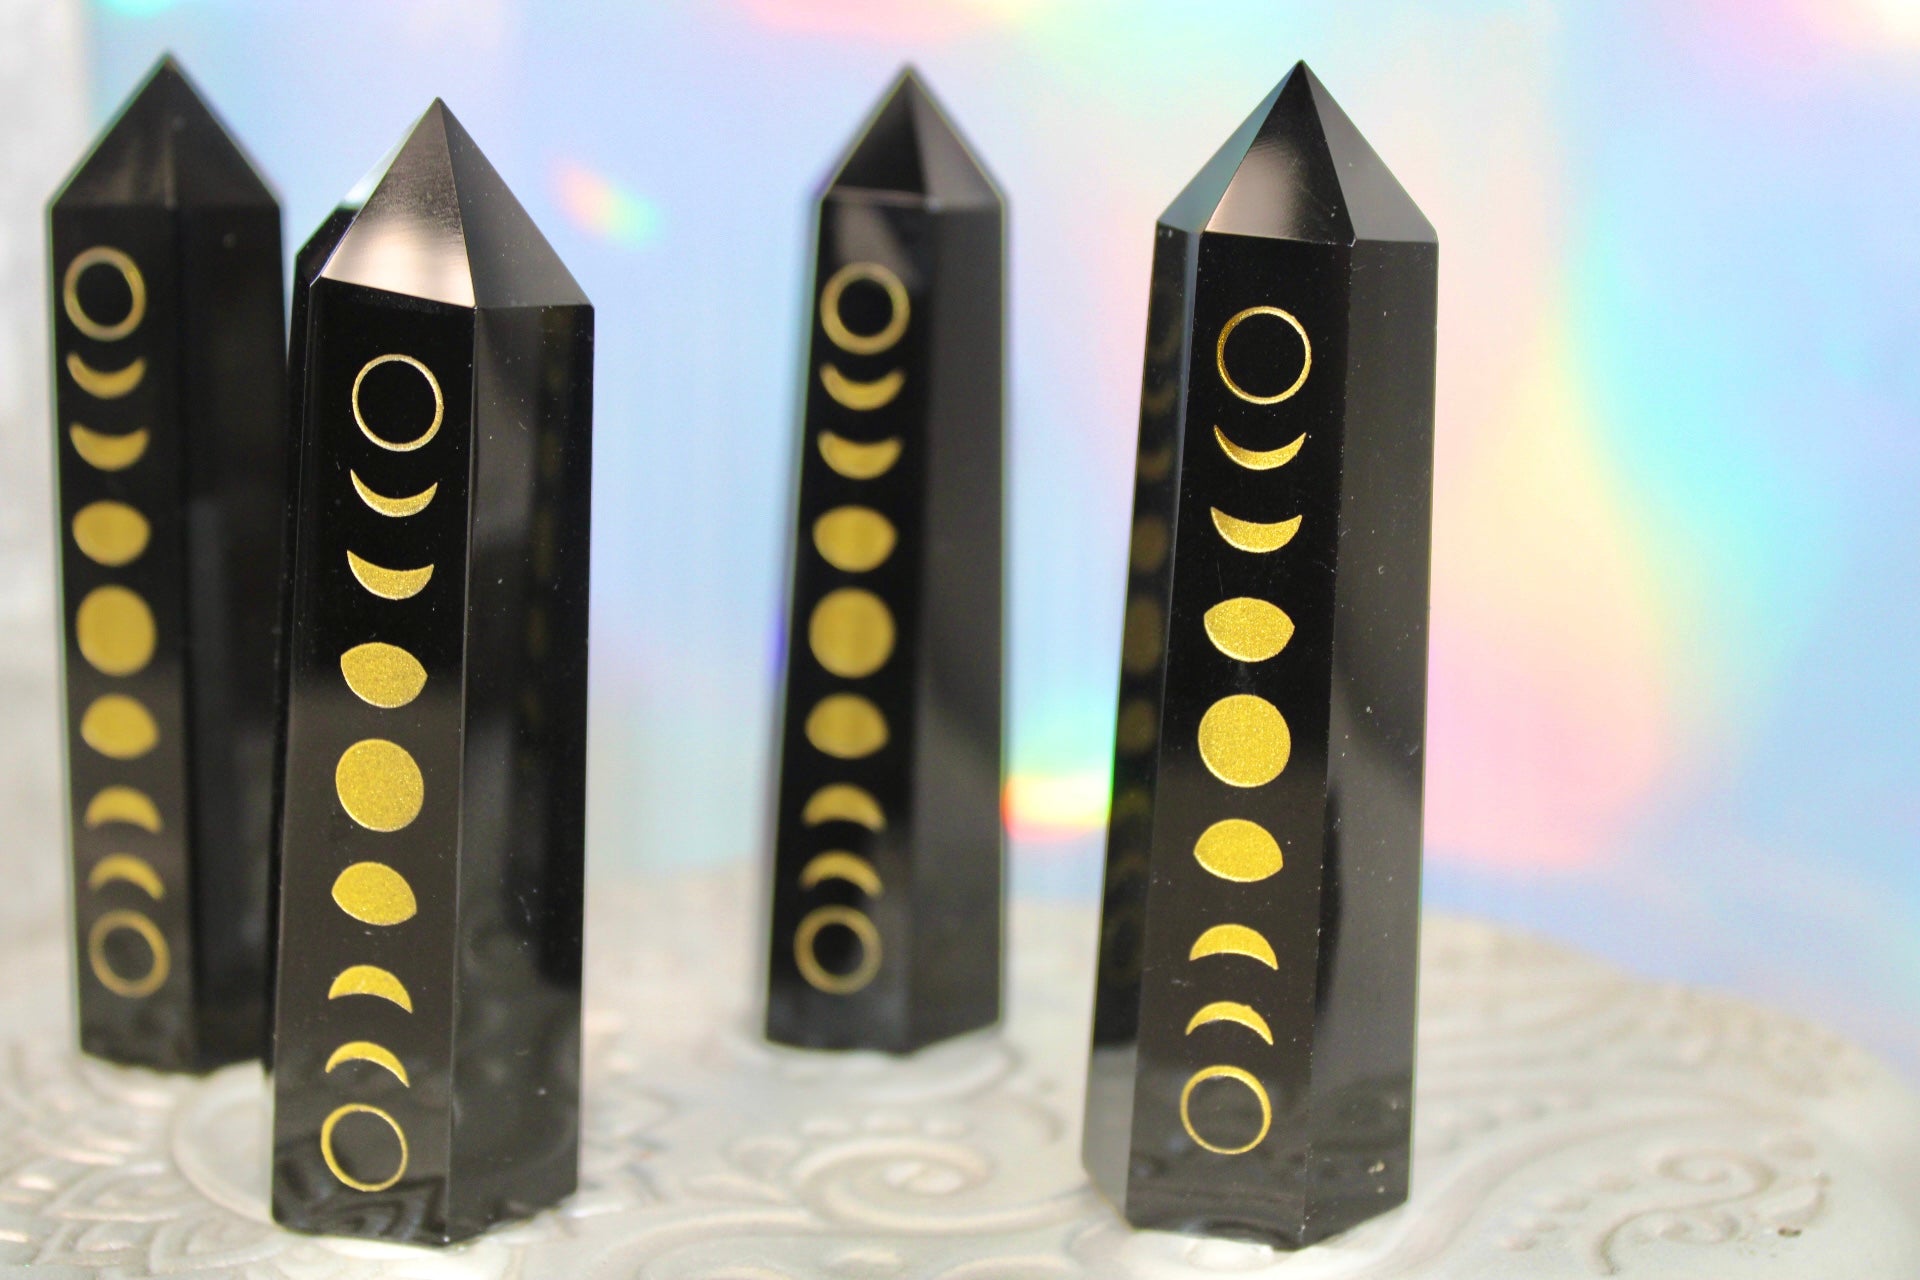 Black Obsidian Crystal Point with Moon Phases Carving